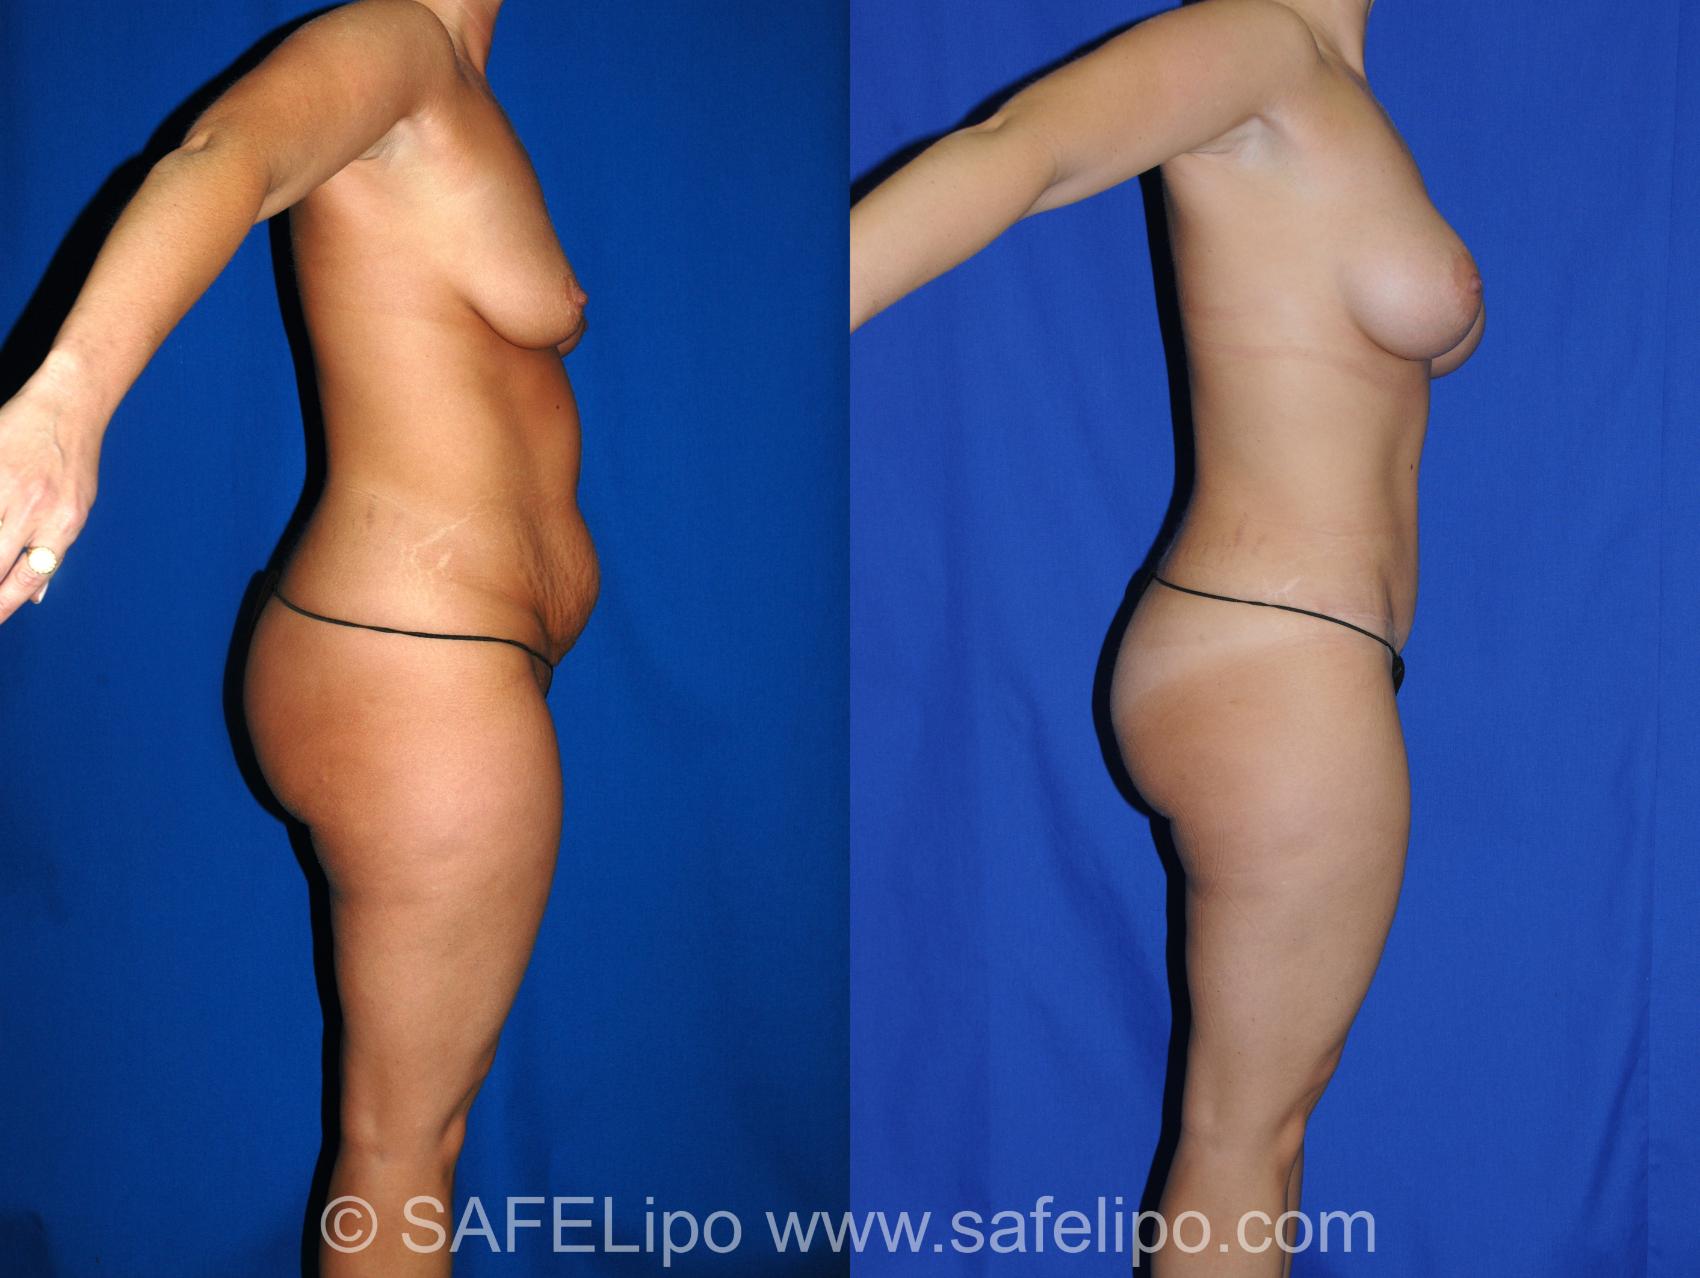 Abdominoplasty Right Side Photo, Shreveport, LA, The Wall Center for Plastic Surgery, Case 323